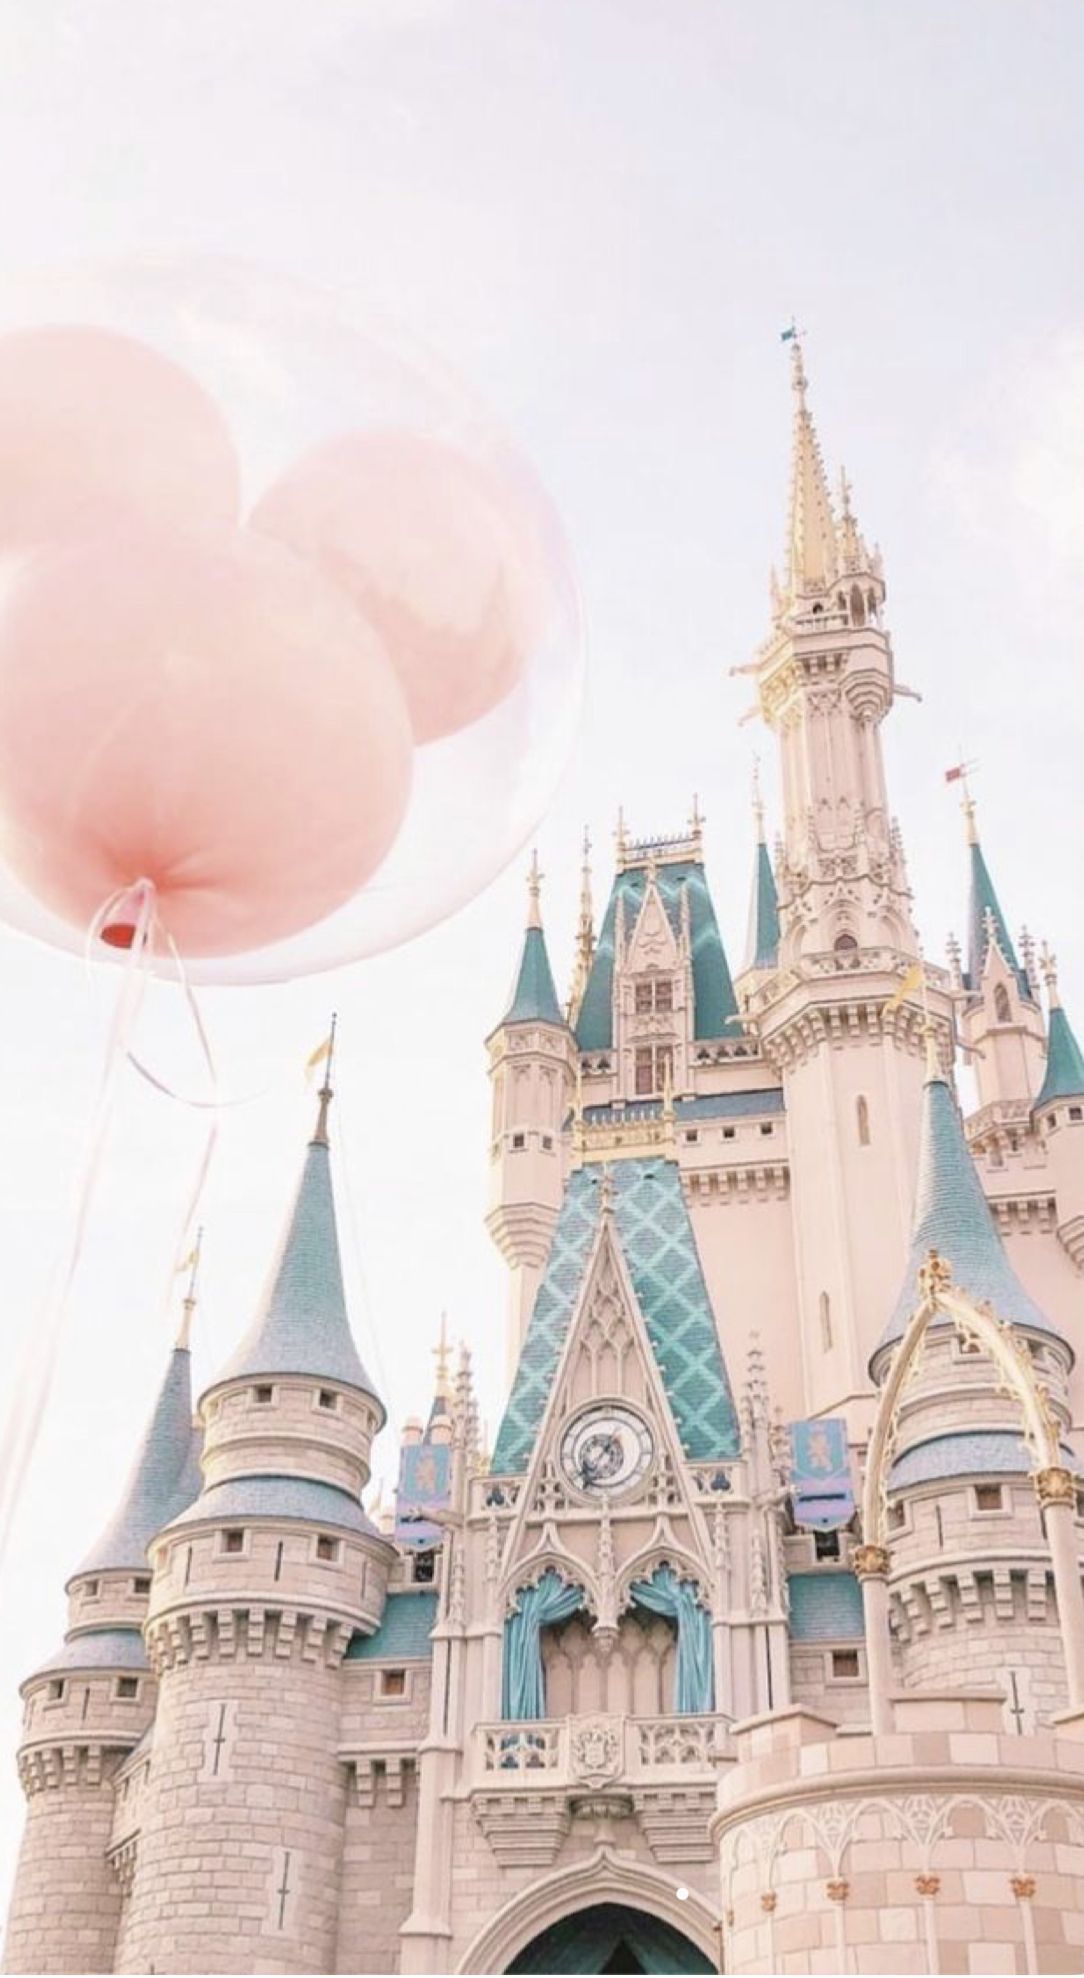 A balloon in the shape of pink hearts is held by someone - Disneyland, castle, Disney, balloons